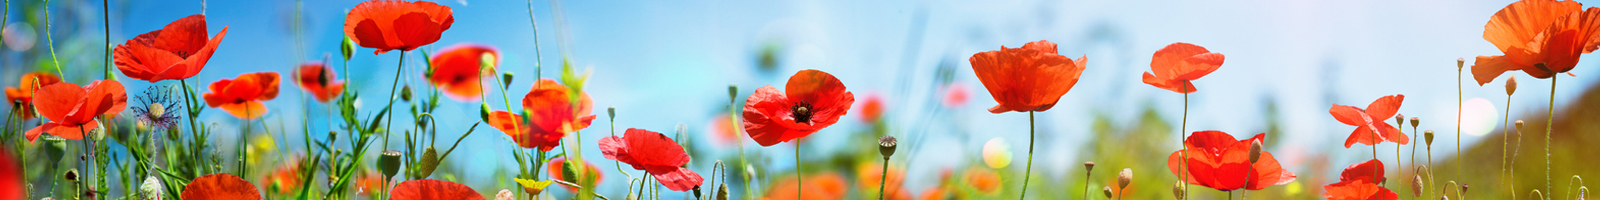 Header for Alicia Mutch | Poppies Reaching Towards the Sky | Hypnotherapy and Massage Therapy | Healdsburg, California